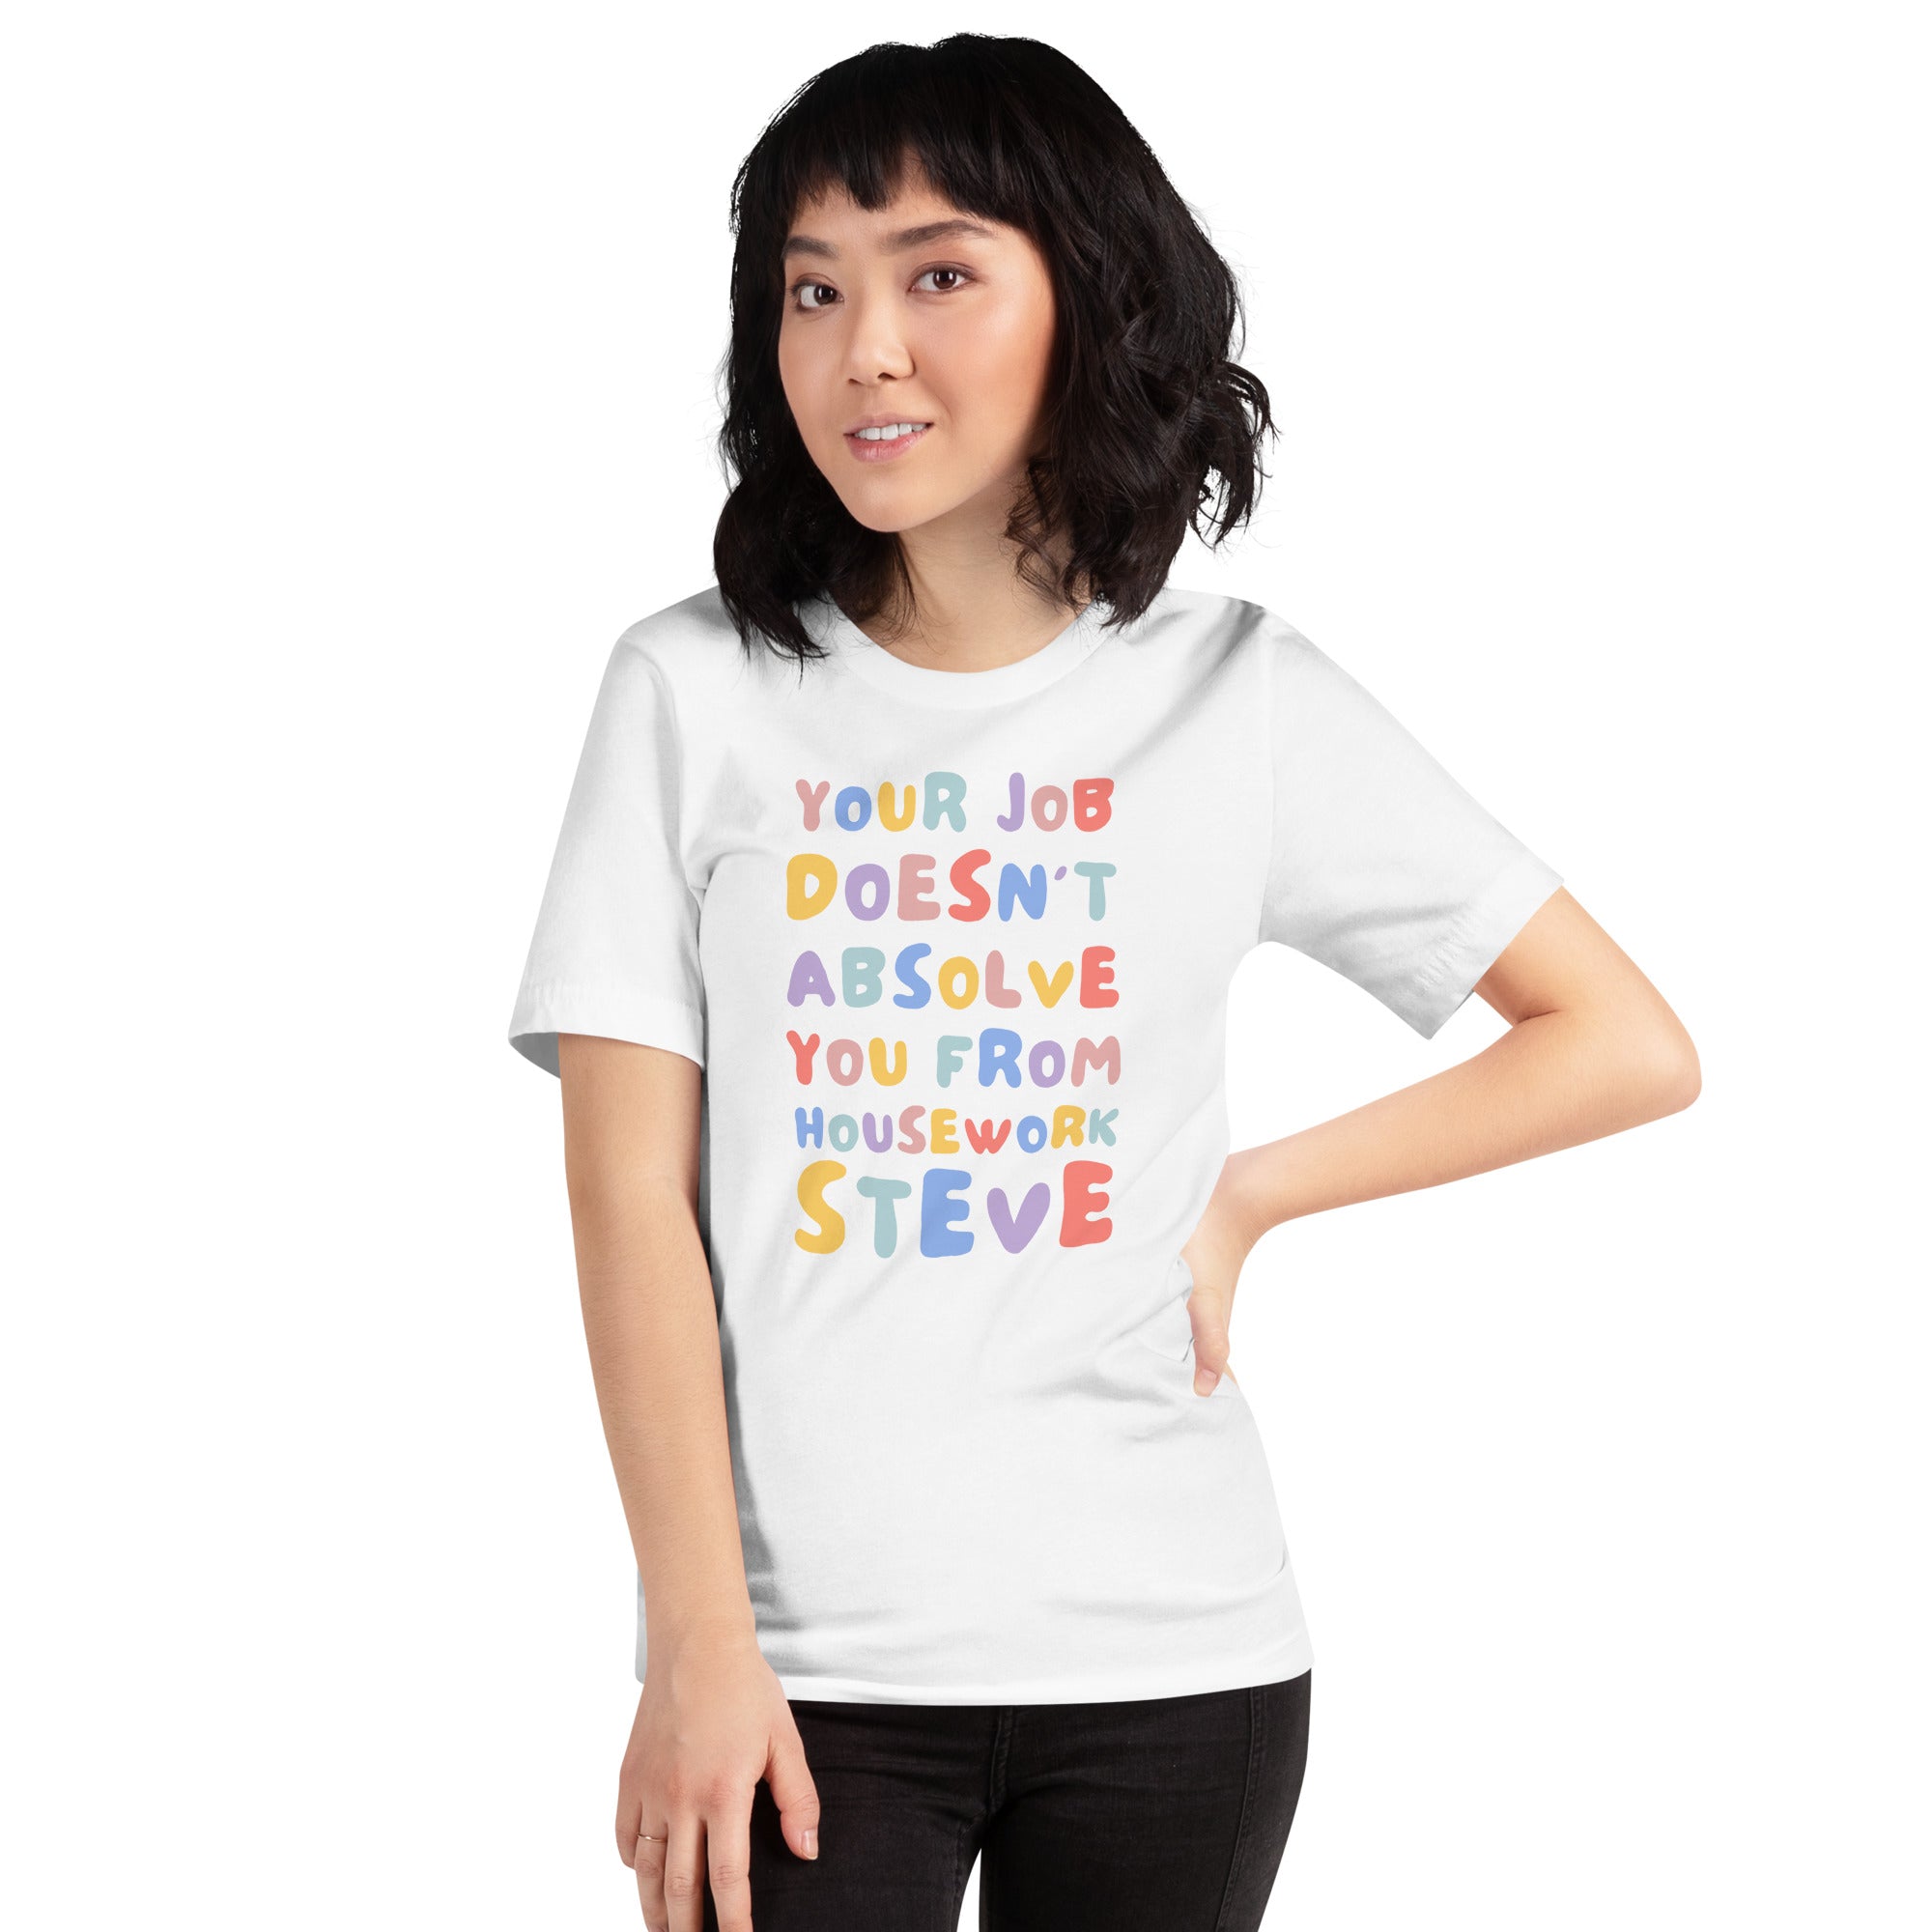 Your Job Doesn’t Absolve You From Housework Steve Unisex Feminist T-shirt - Shop Women’s Rights T-shirts - White Oversized Women’s T-shirt